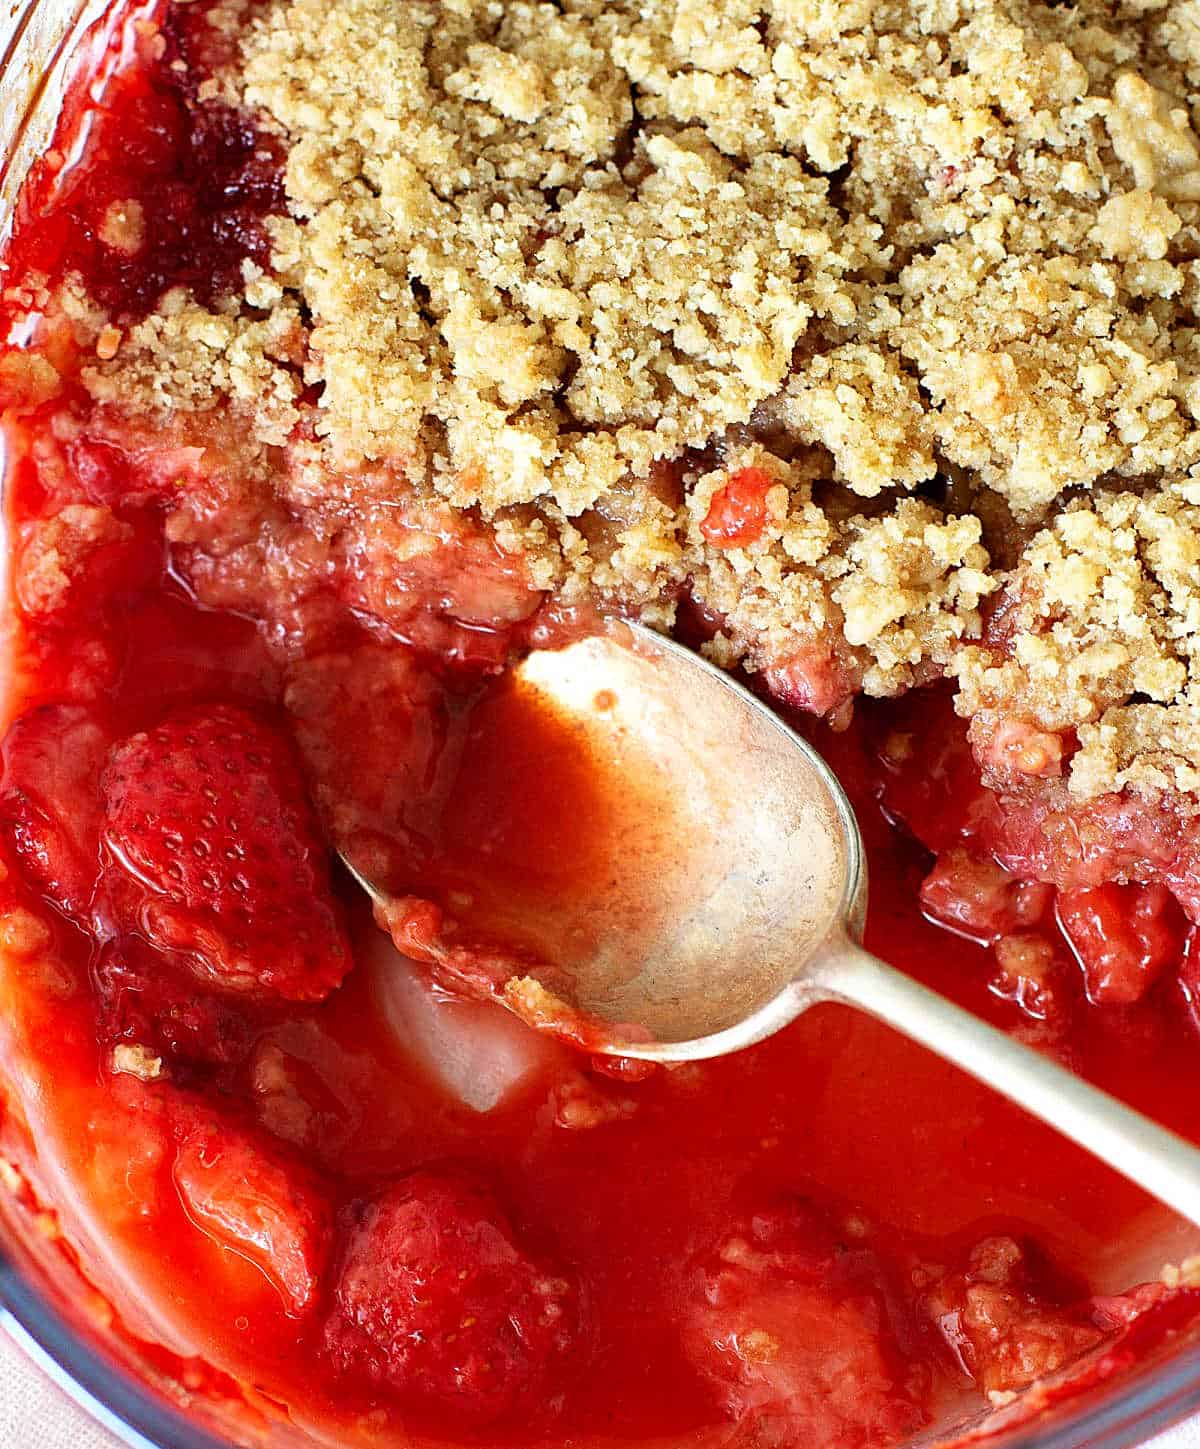 Silver spoon in pool of strawberry crisp on glass dish.